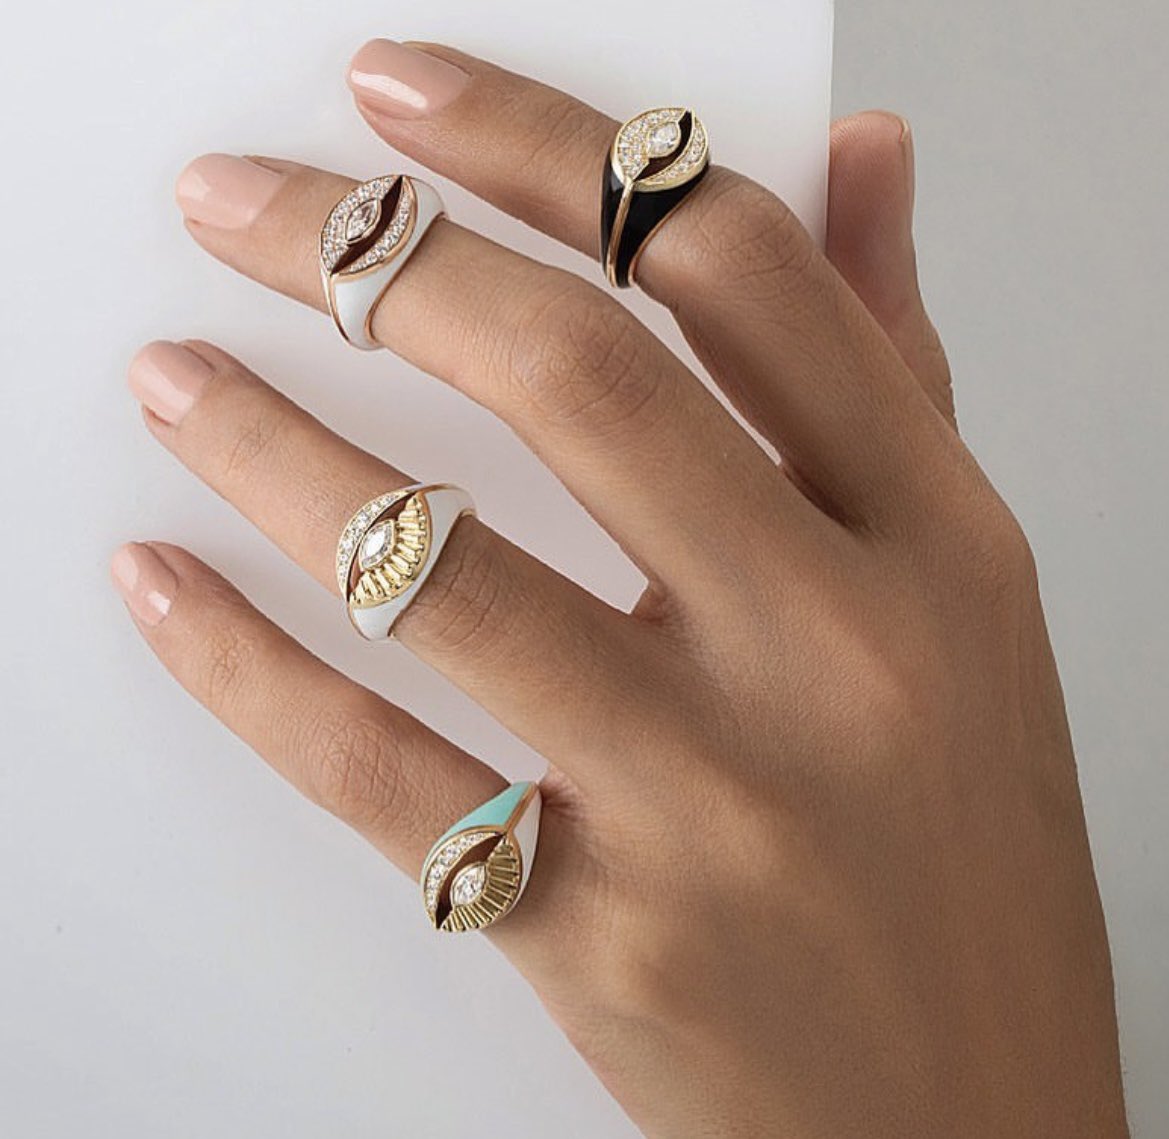 New rings addition to our
'Written in the stars' collection!
#falamankbytarfaitani #jewerlyfashion #jewels
#finejewerly #rings #jewerlyblogger #trendyjewelry
#jewerlydesigner #dubai #dohablogger